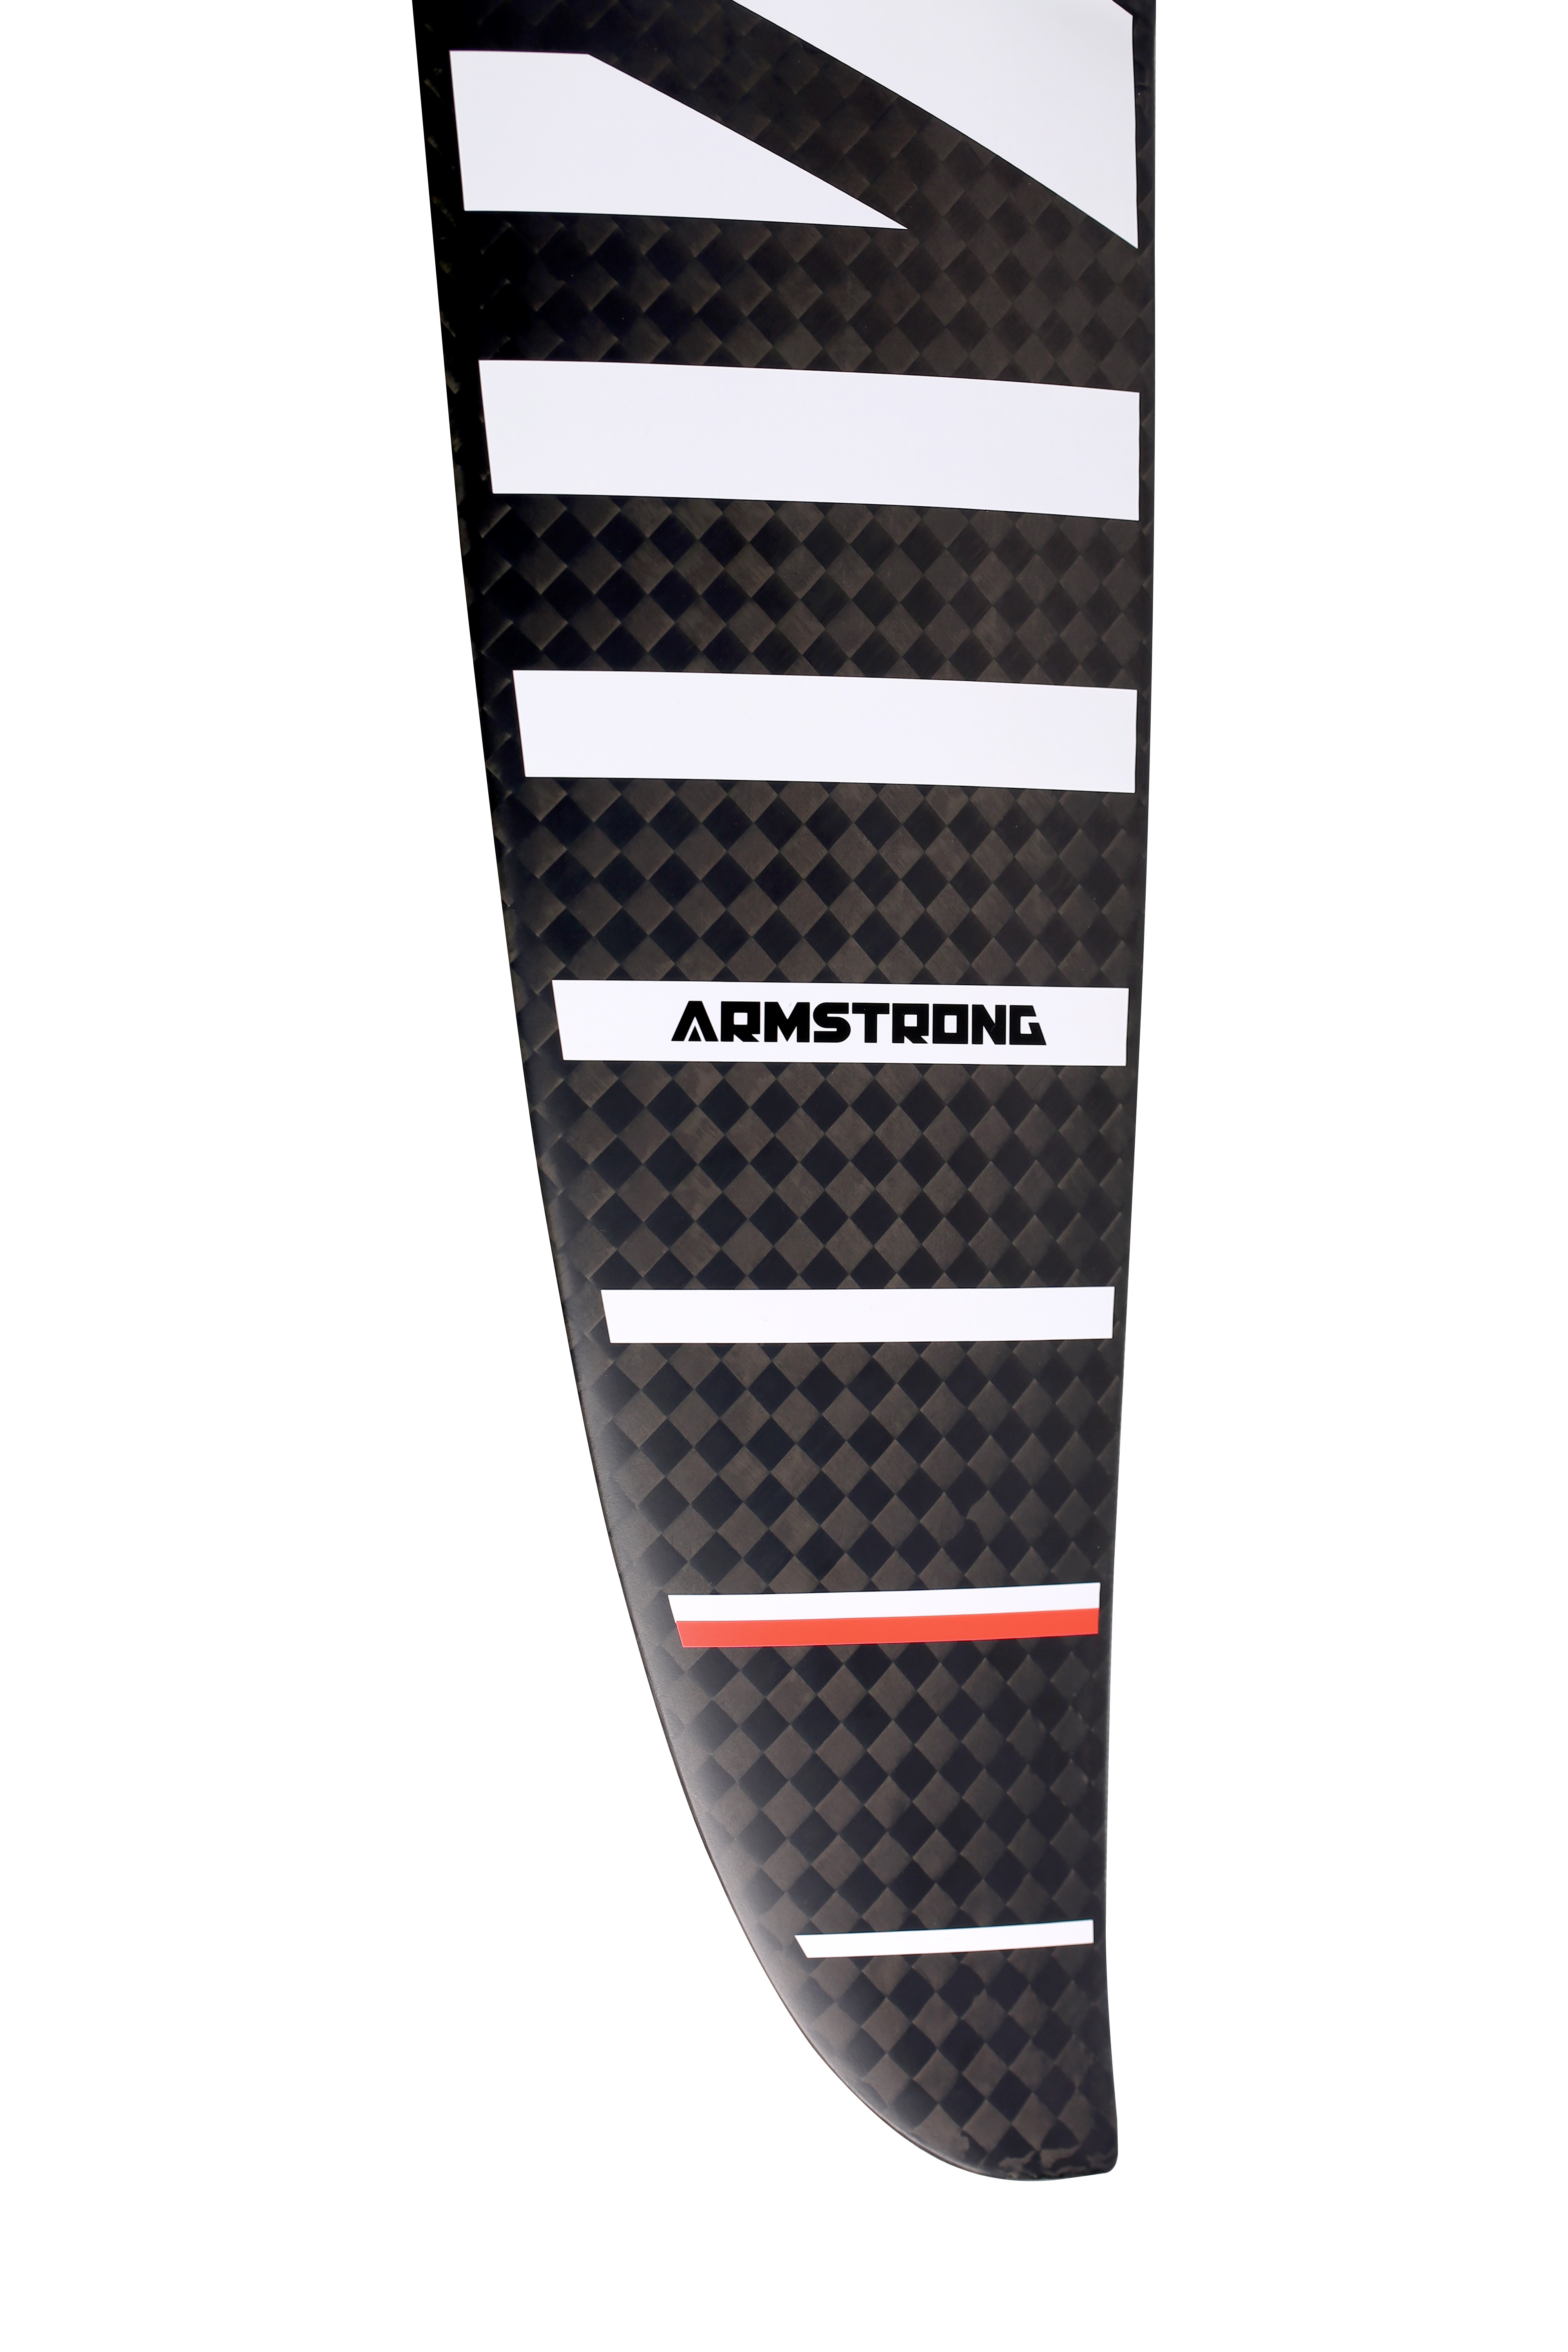 Armstrong Foil Frontwing MA 1000